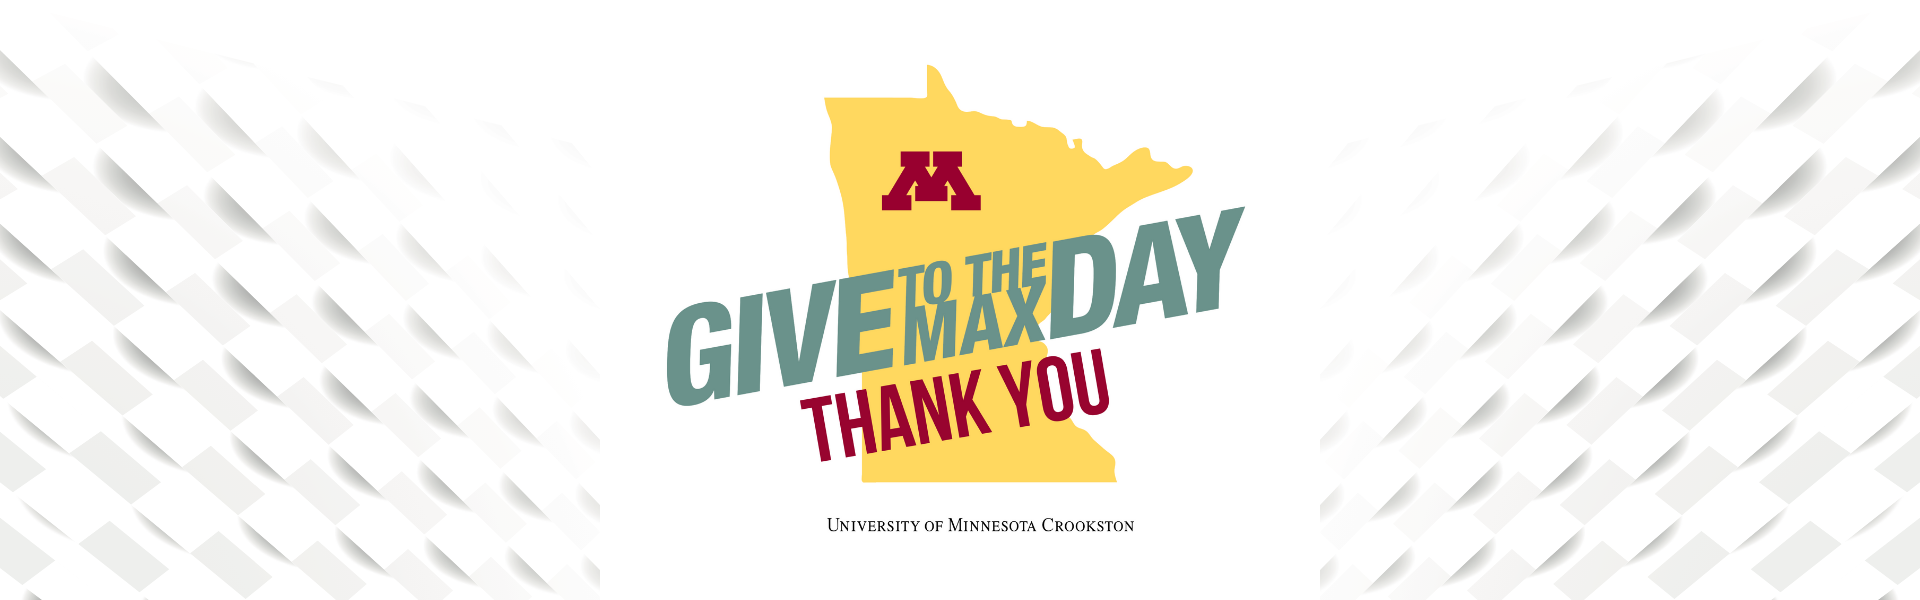 Thank you for giving to the max at the University of Minnesota Crookston